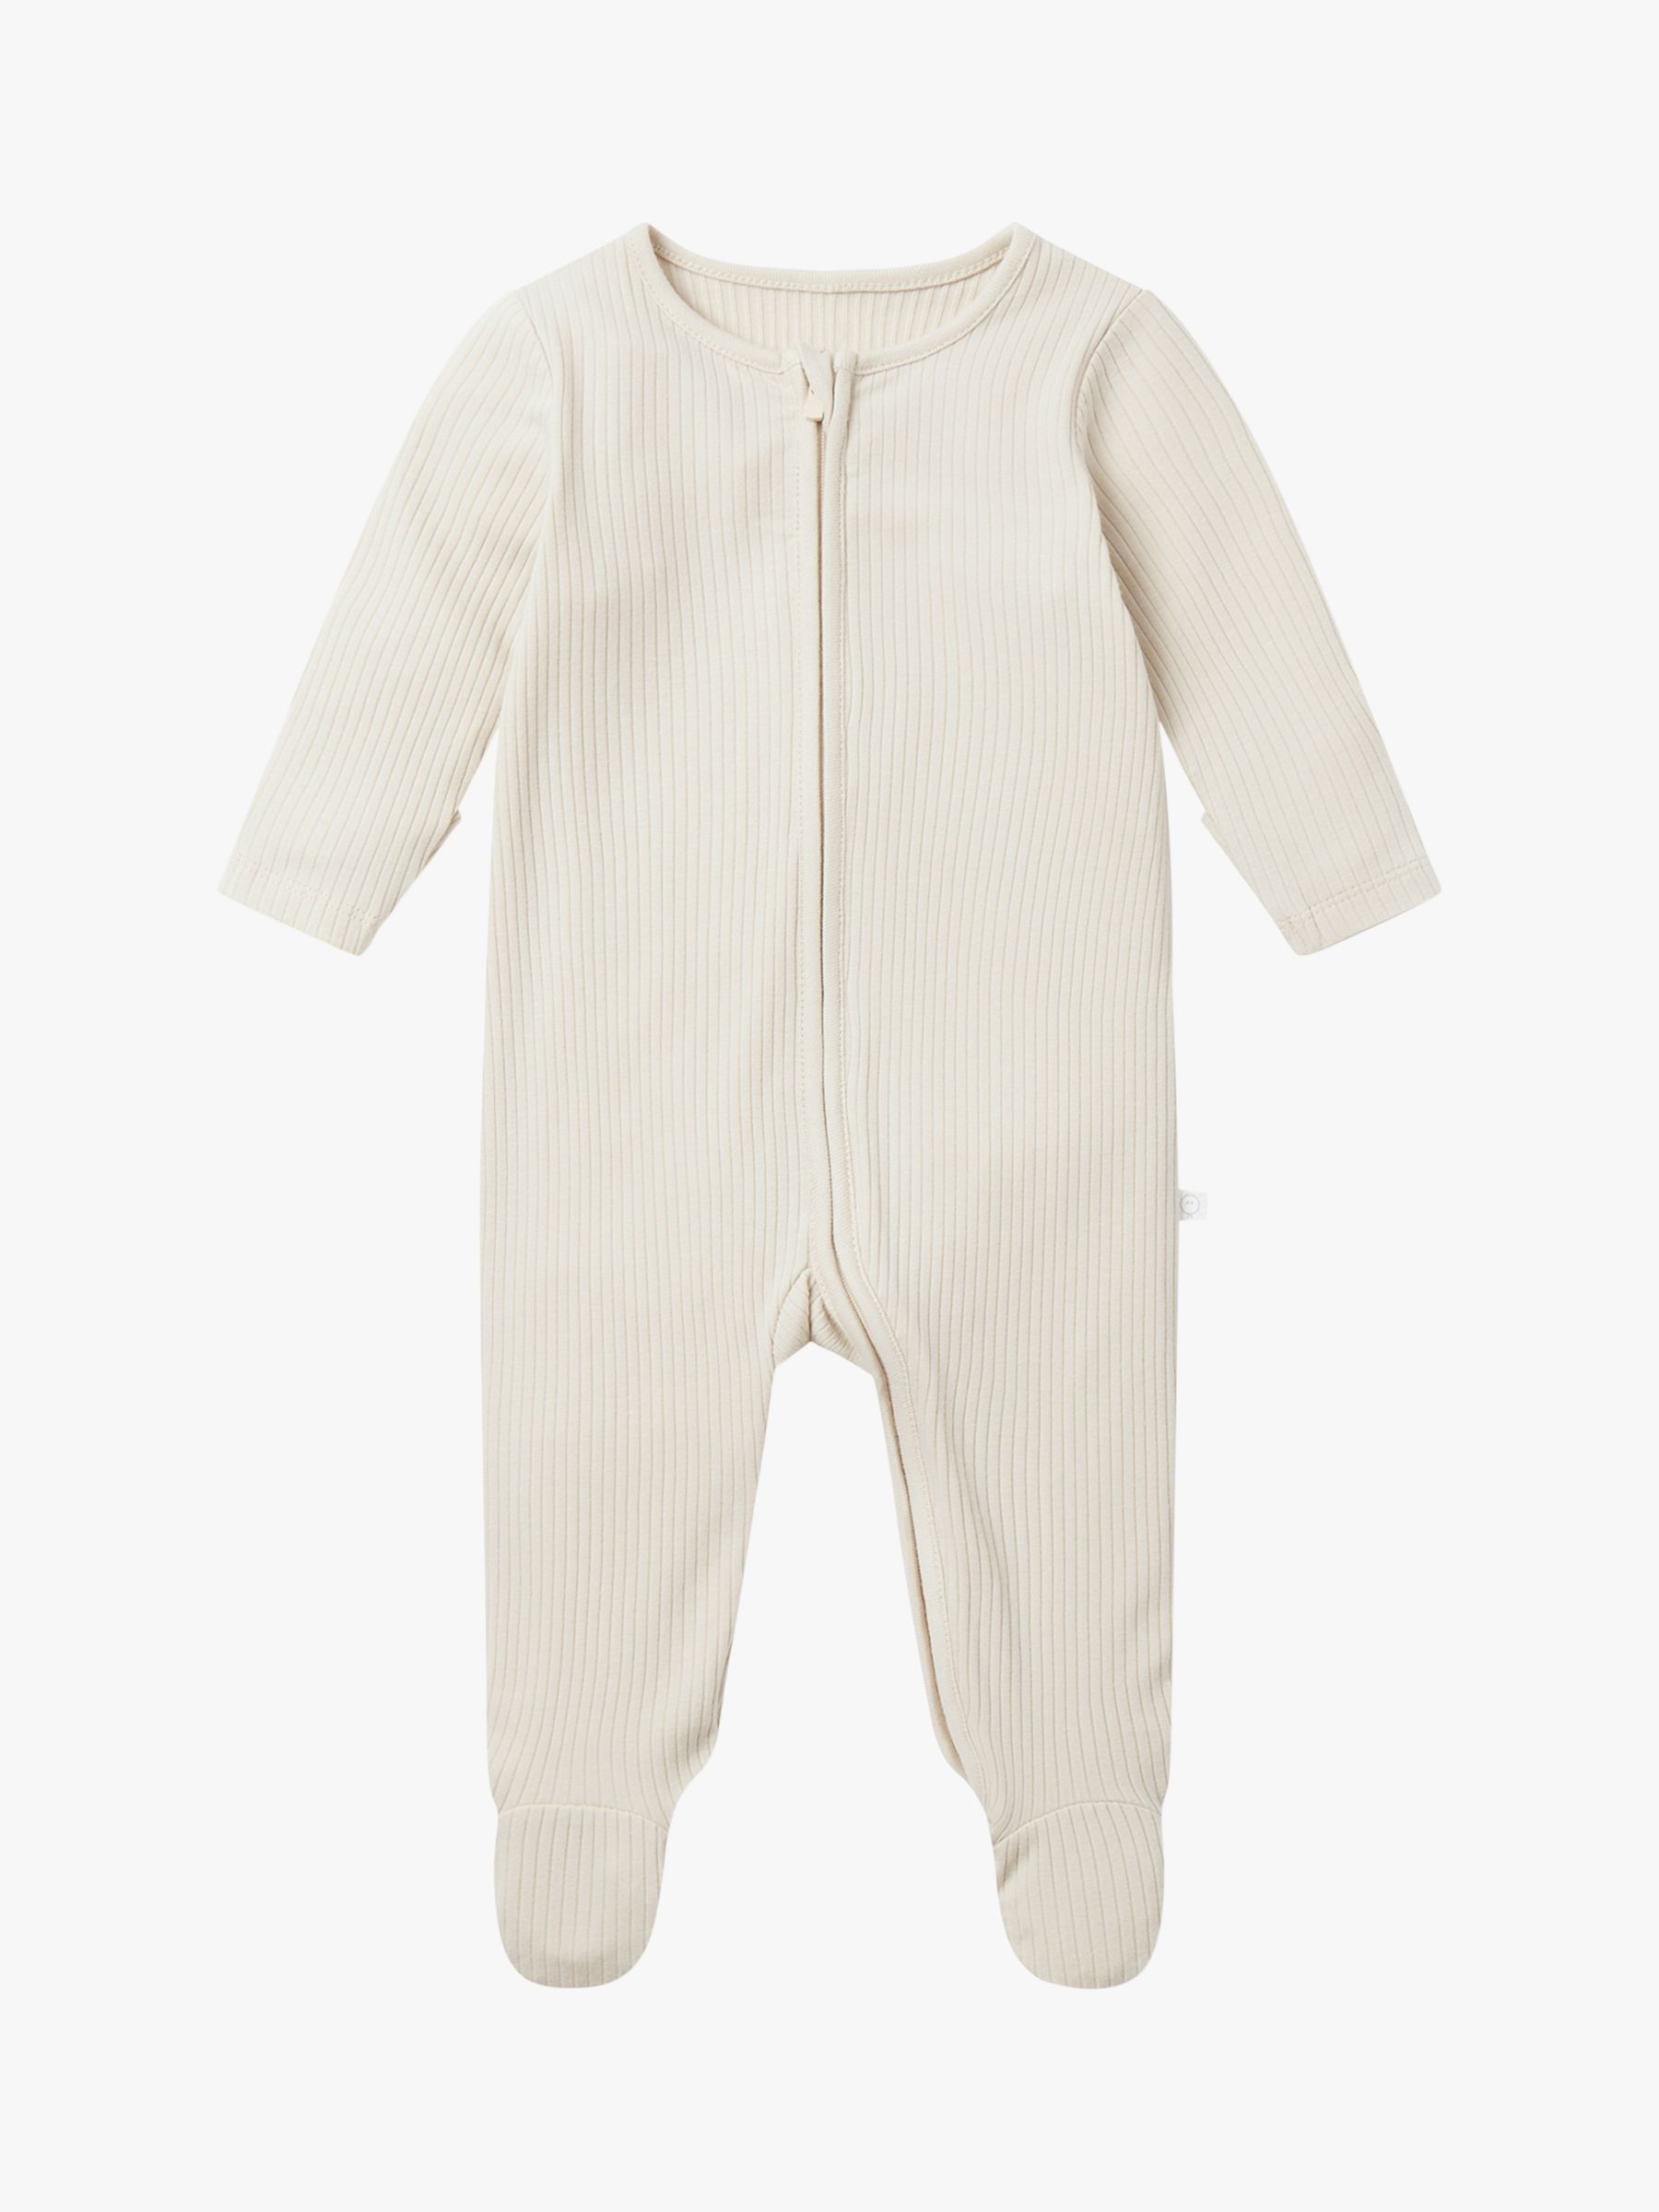 MORI Baby Clever Zip Ribbed Sleepsuit, Cream, 3-6 months